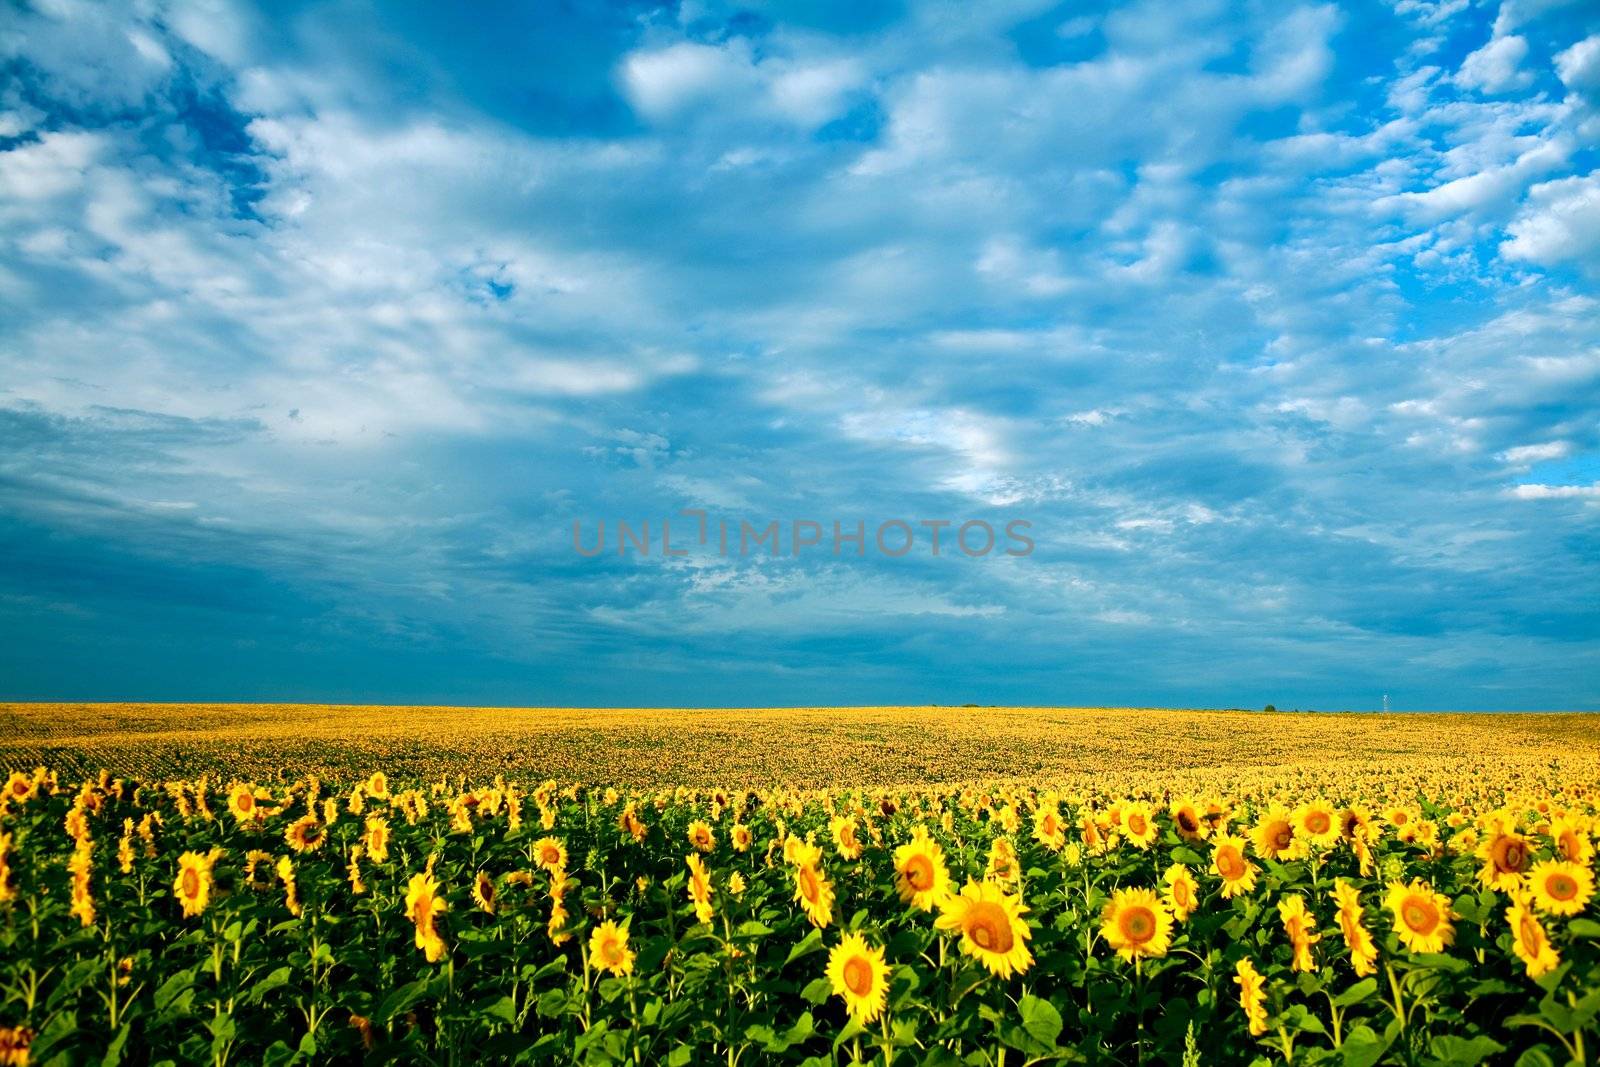 A field of sunflowers, in the south of Ukraine